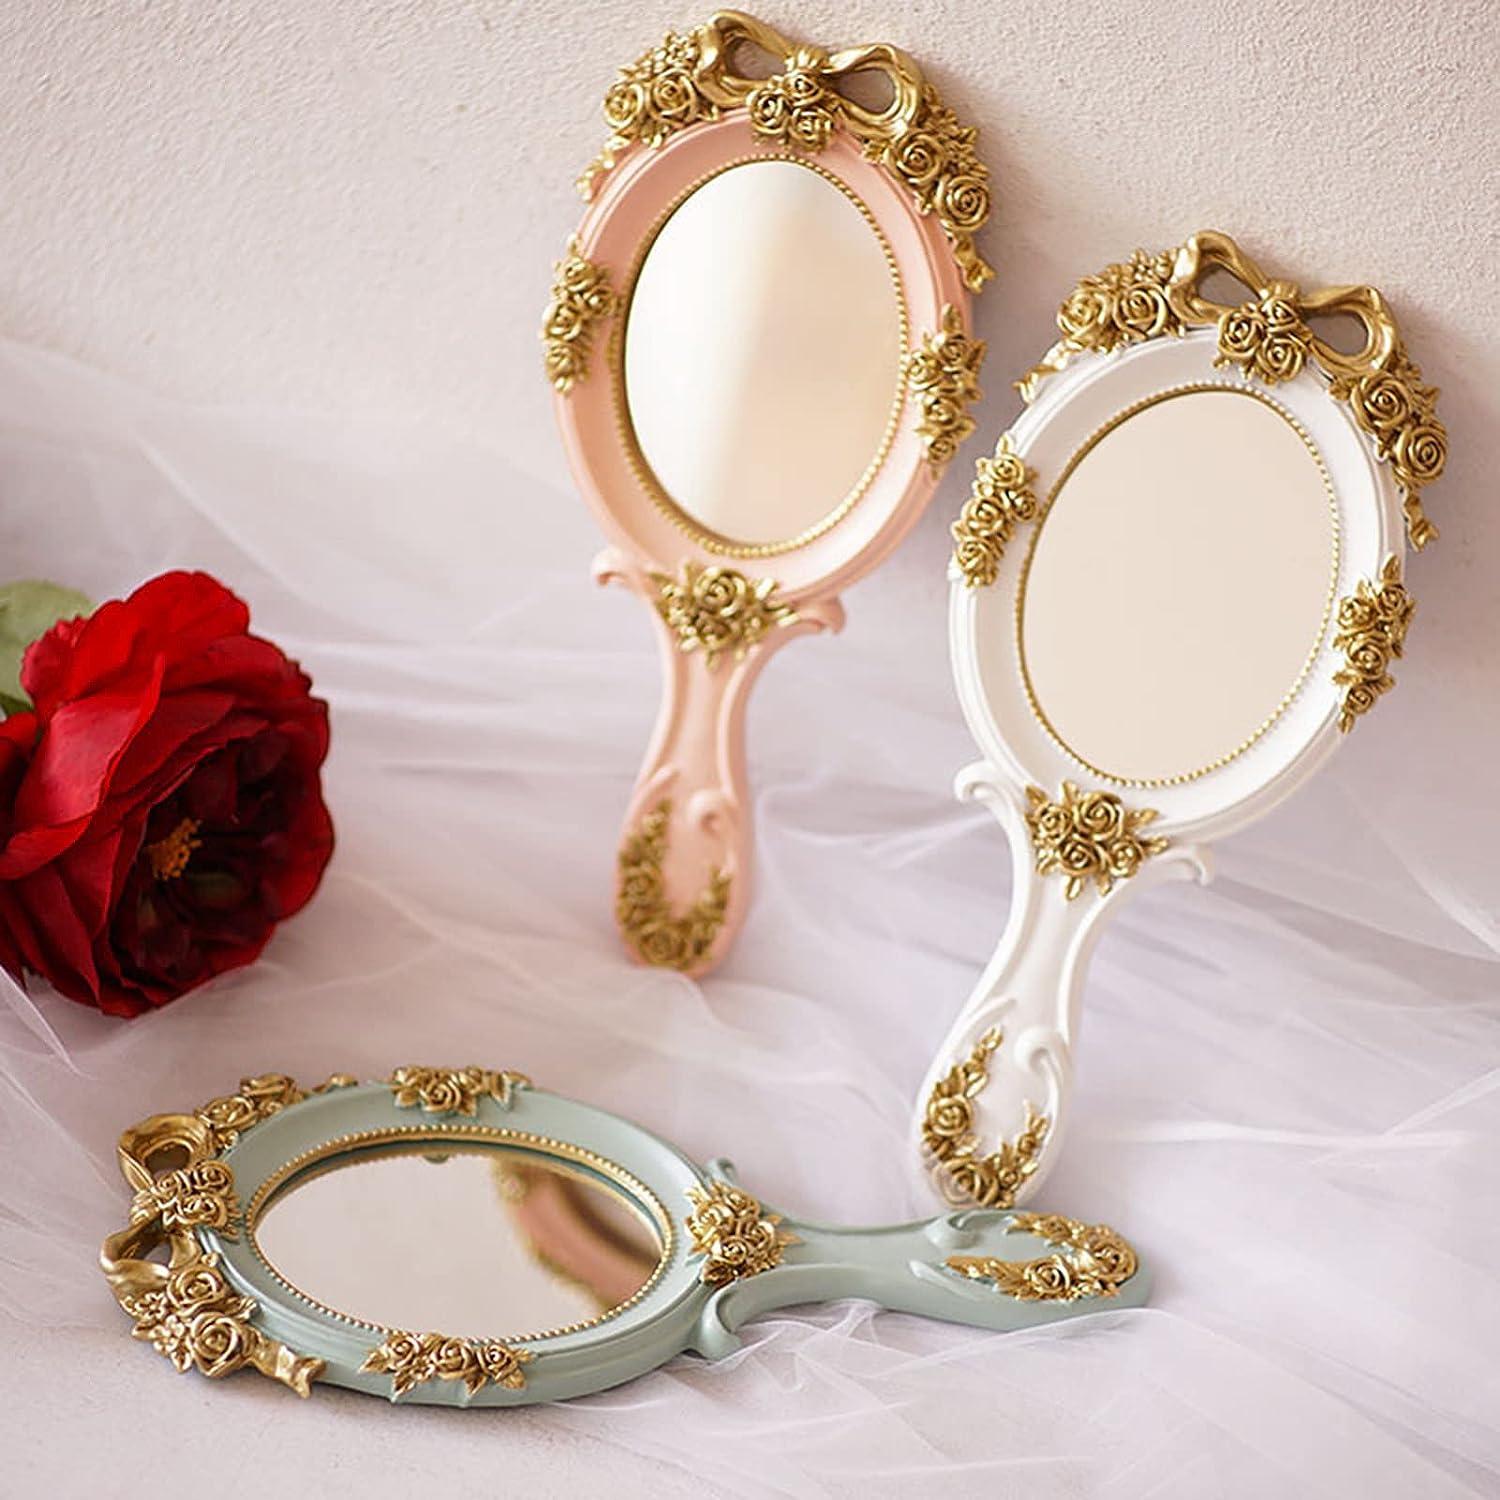 Vintage Handheld Mirror, Small Cute Hand Held Decorative Mirrors for Girls Makeup Embossed Flower Portable Antique Travel Personal Cosmetic Mirror Wit